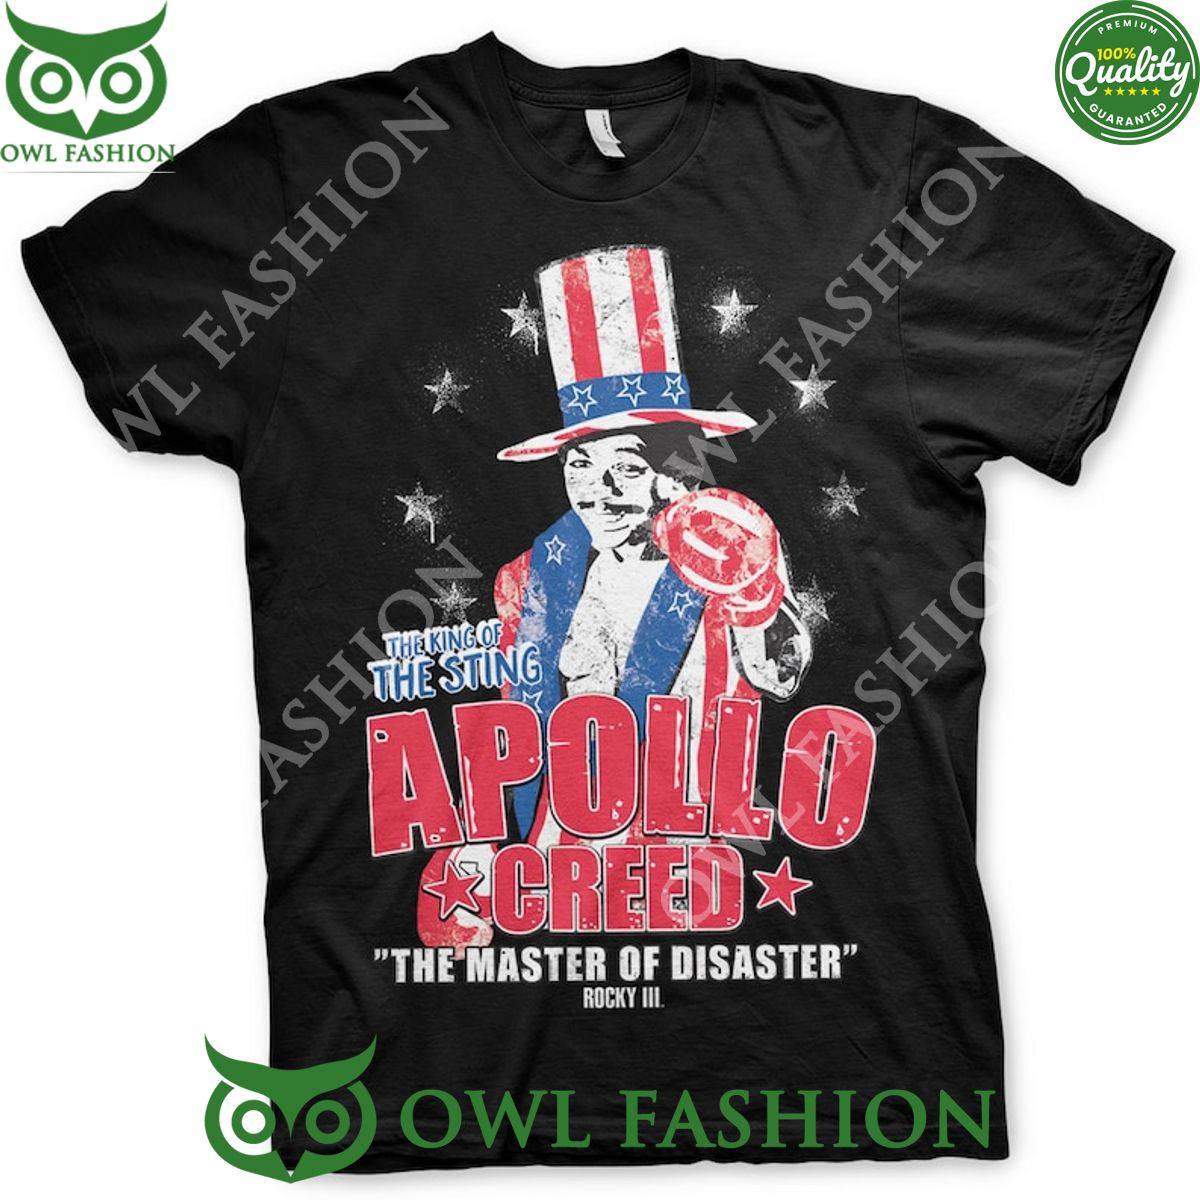 rocky iii apollo creed carl weathers rip the king of the sting the master of disaster t shirt 1 zJHbZ.jpg